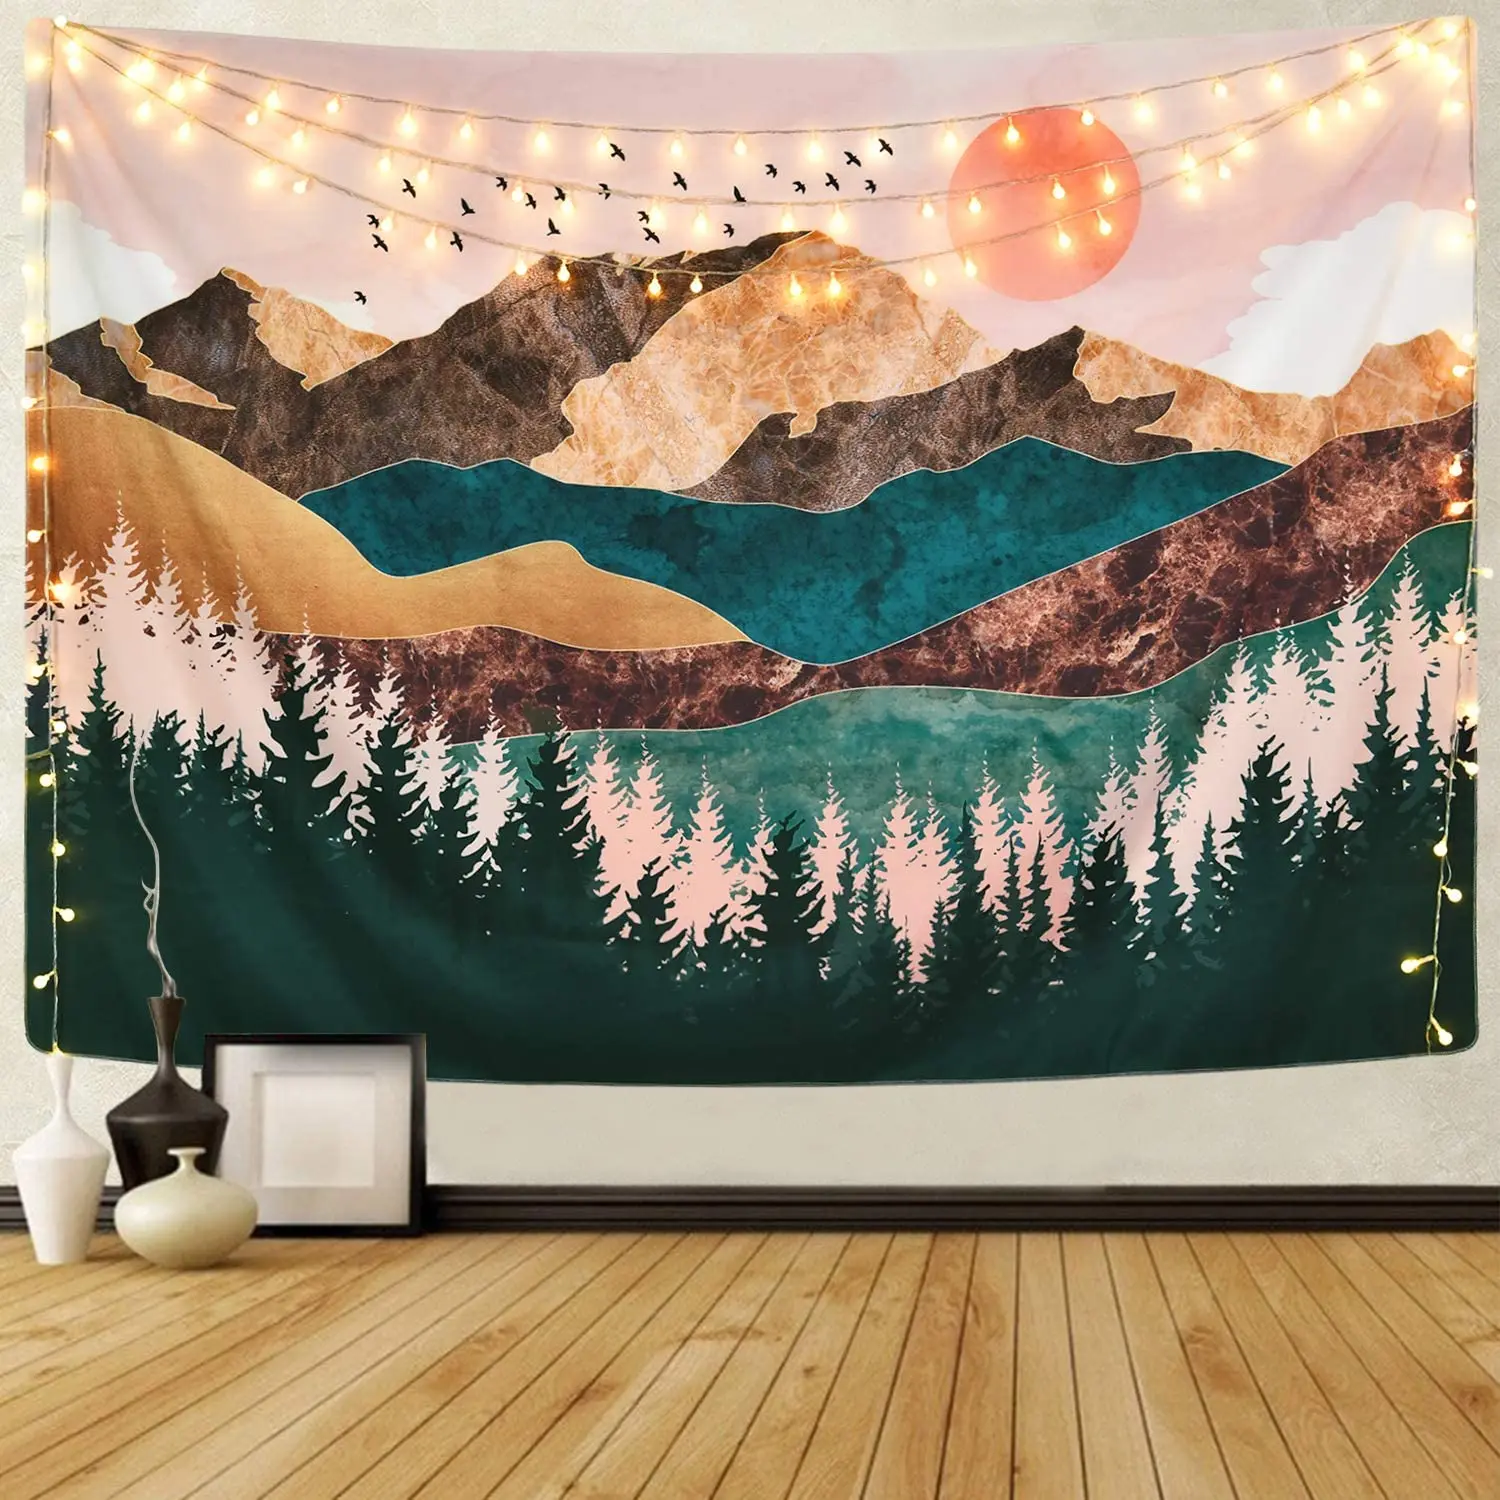 

Mountain Tapestry Forest Tree Tapestry Sunset Tapestry Nature Landscape Tapestry Wall Hanging for Living Room 51.2 x 59.1 inches